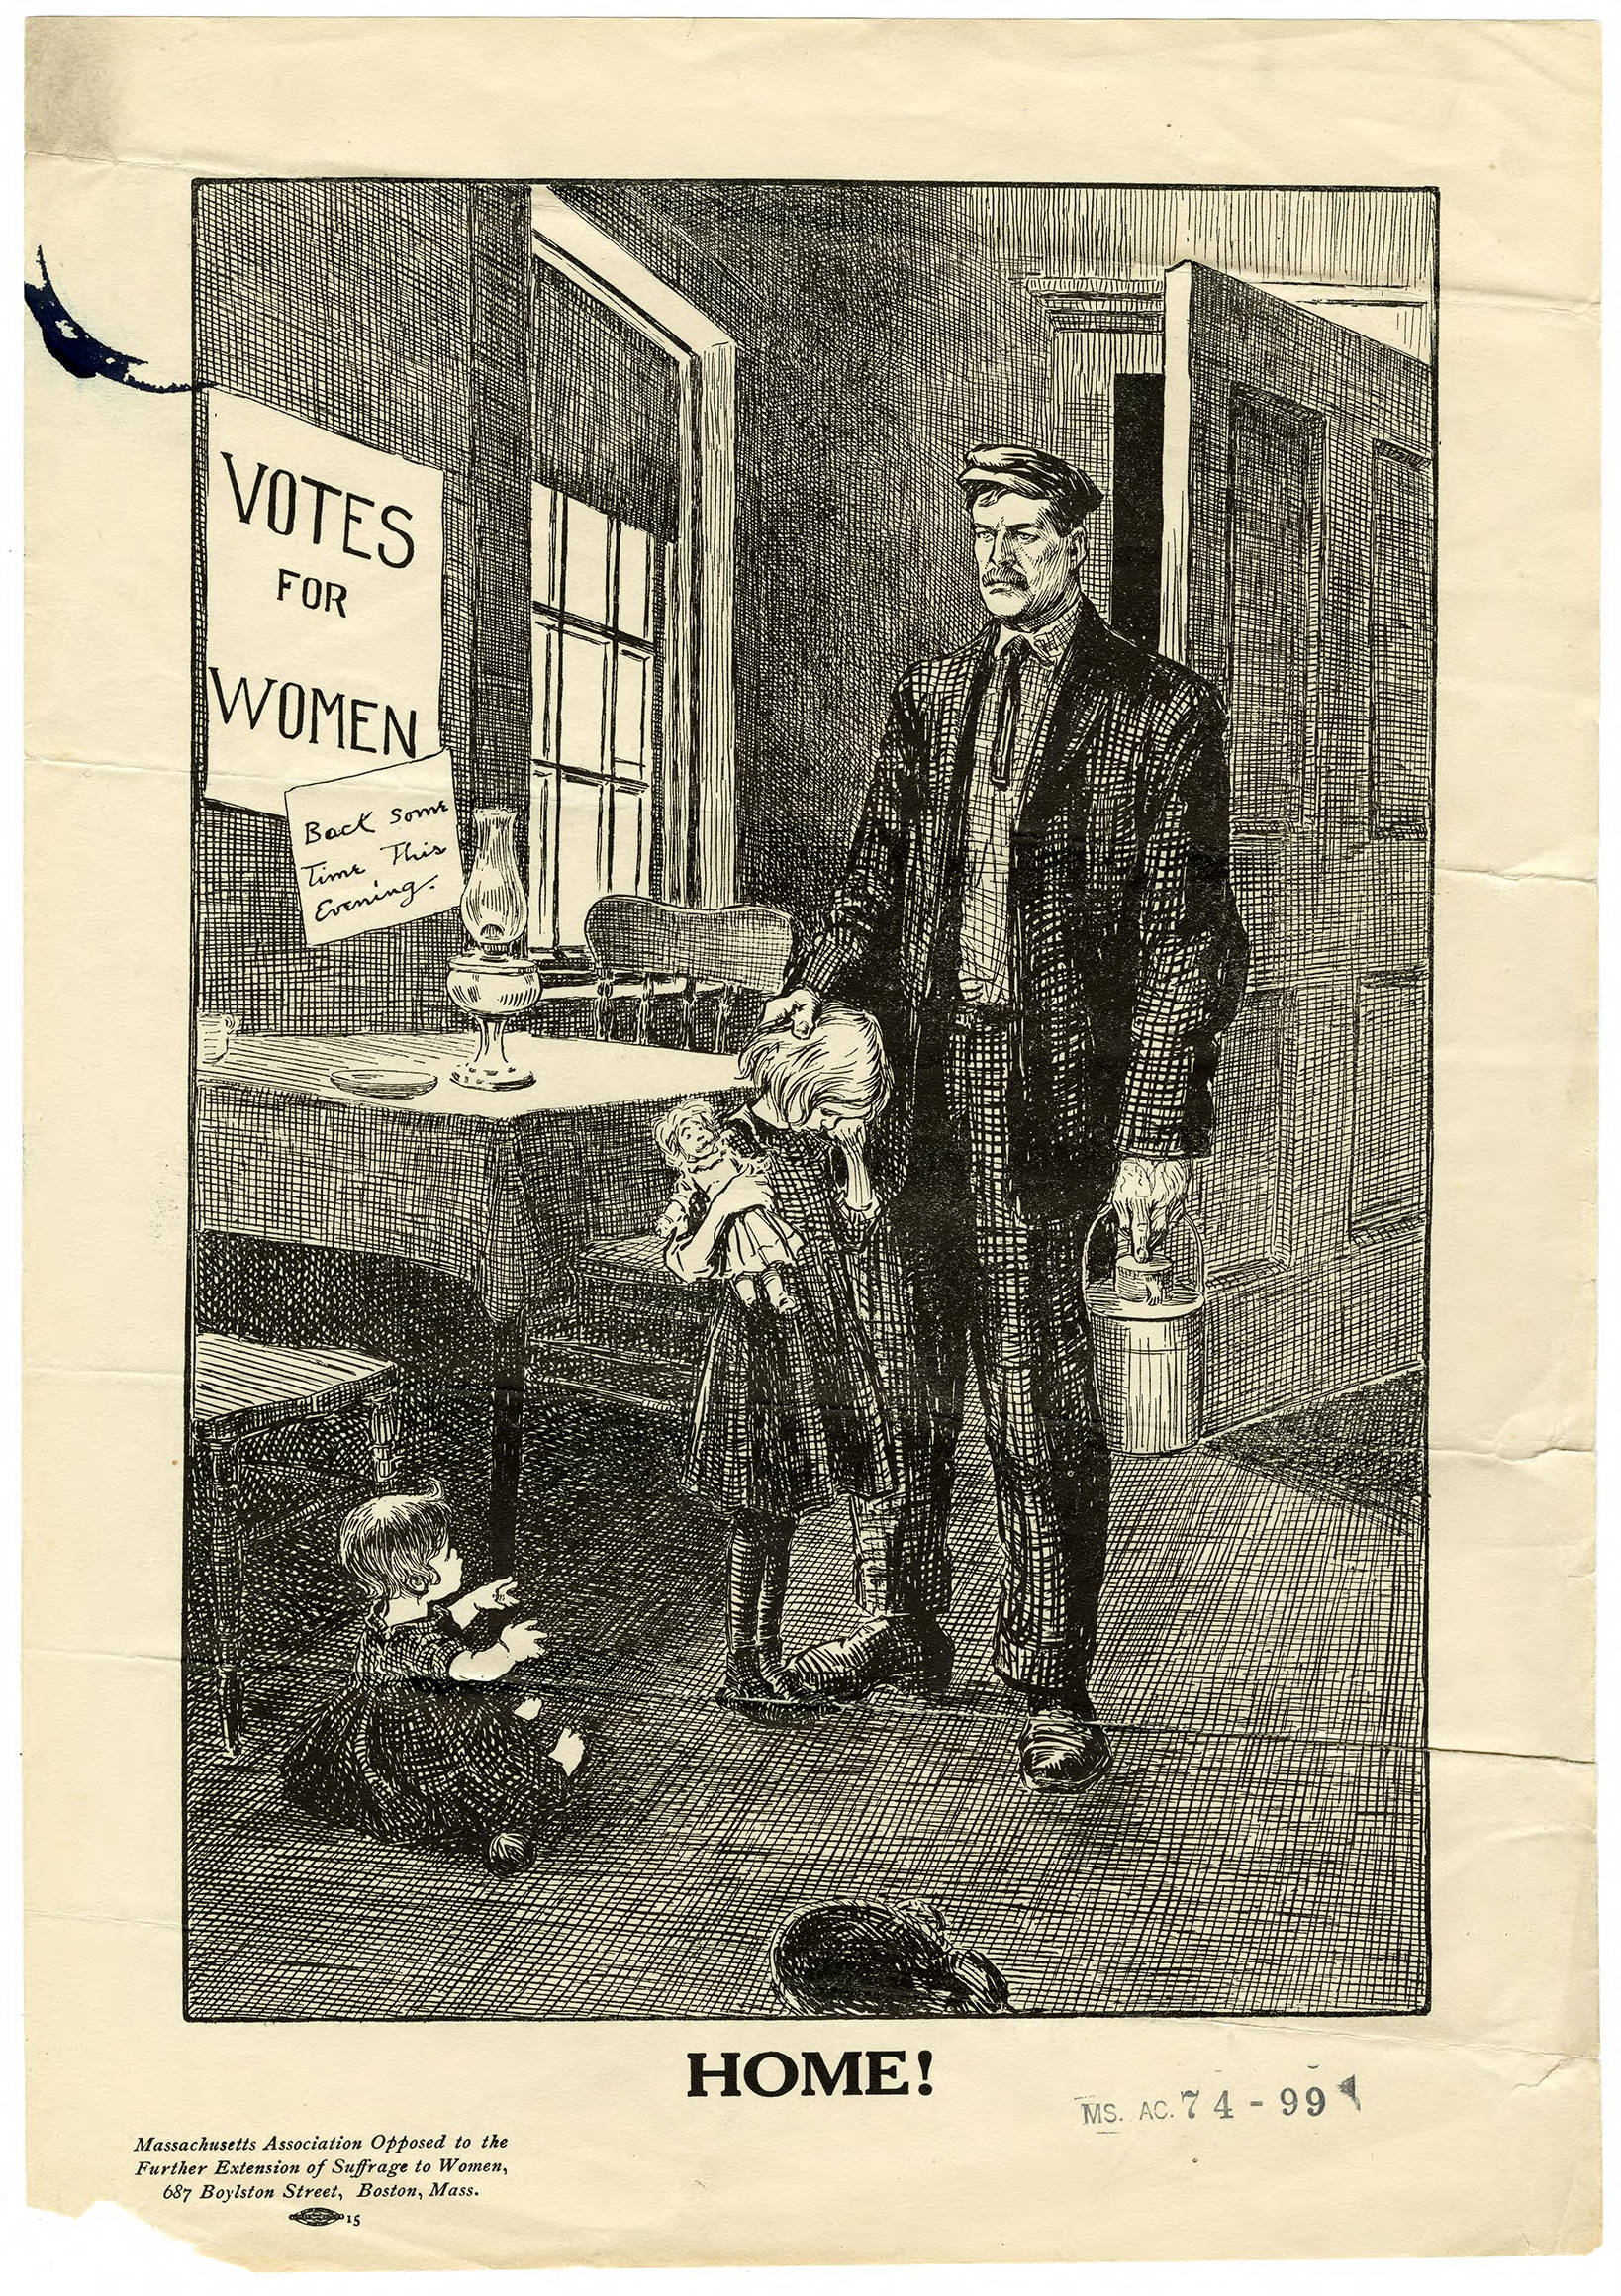 Jilted for the vote? The anti-suffragists predicted the demise of marriage and motherhood if women were given the right to vote. Here, a man returns home to find his two daughters deserted by their mother who is out campaigning for suffrage.